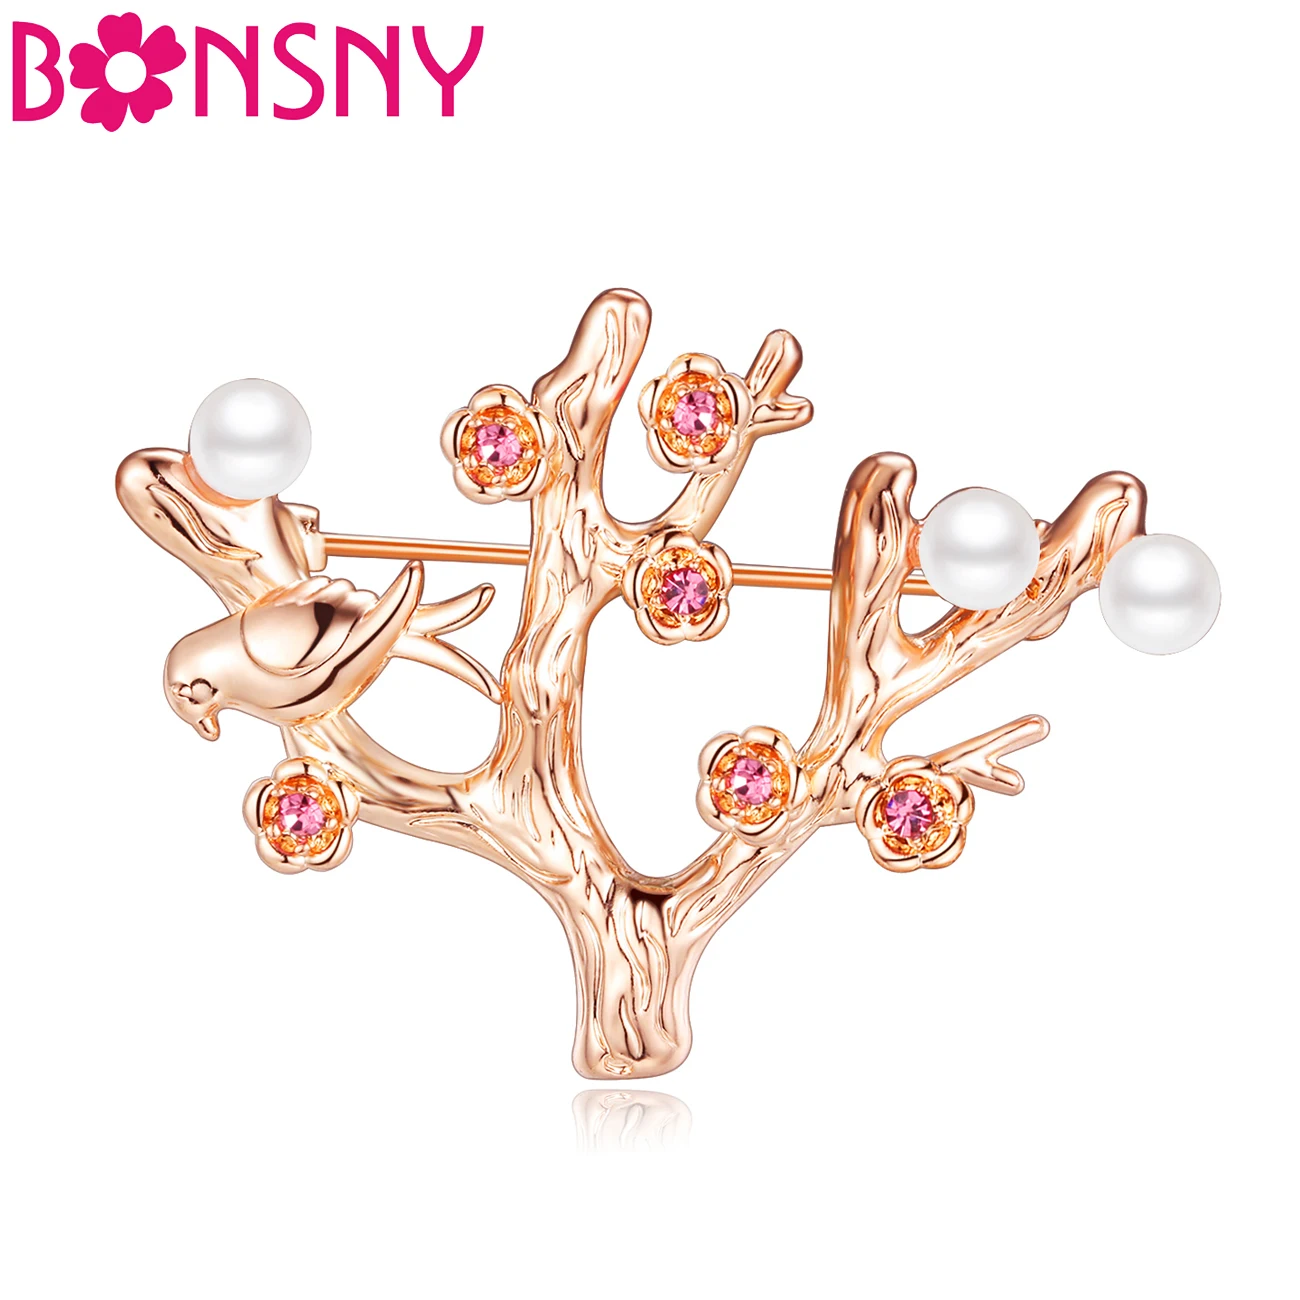 

Bonsny Alloy Rhinestone Tree Brooch For Women Party Brooches Pin Collar Scarf Decoration New Fashion Jewelry Plant Accessories